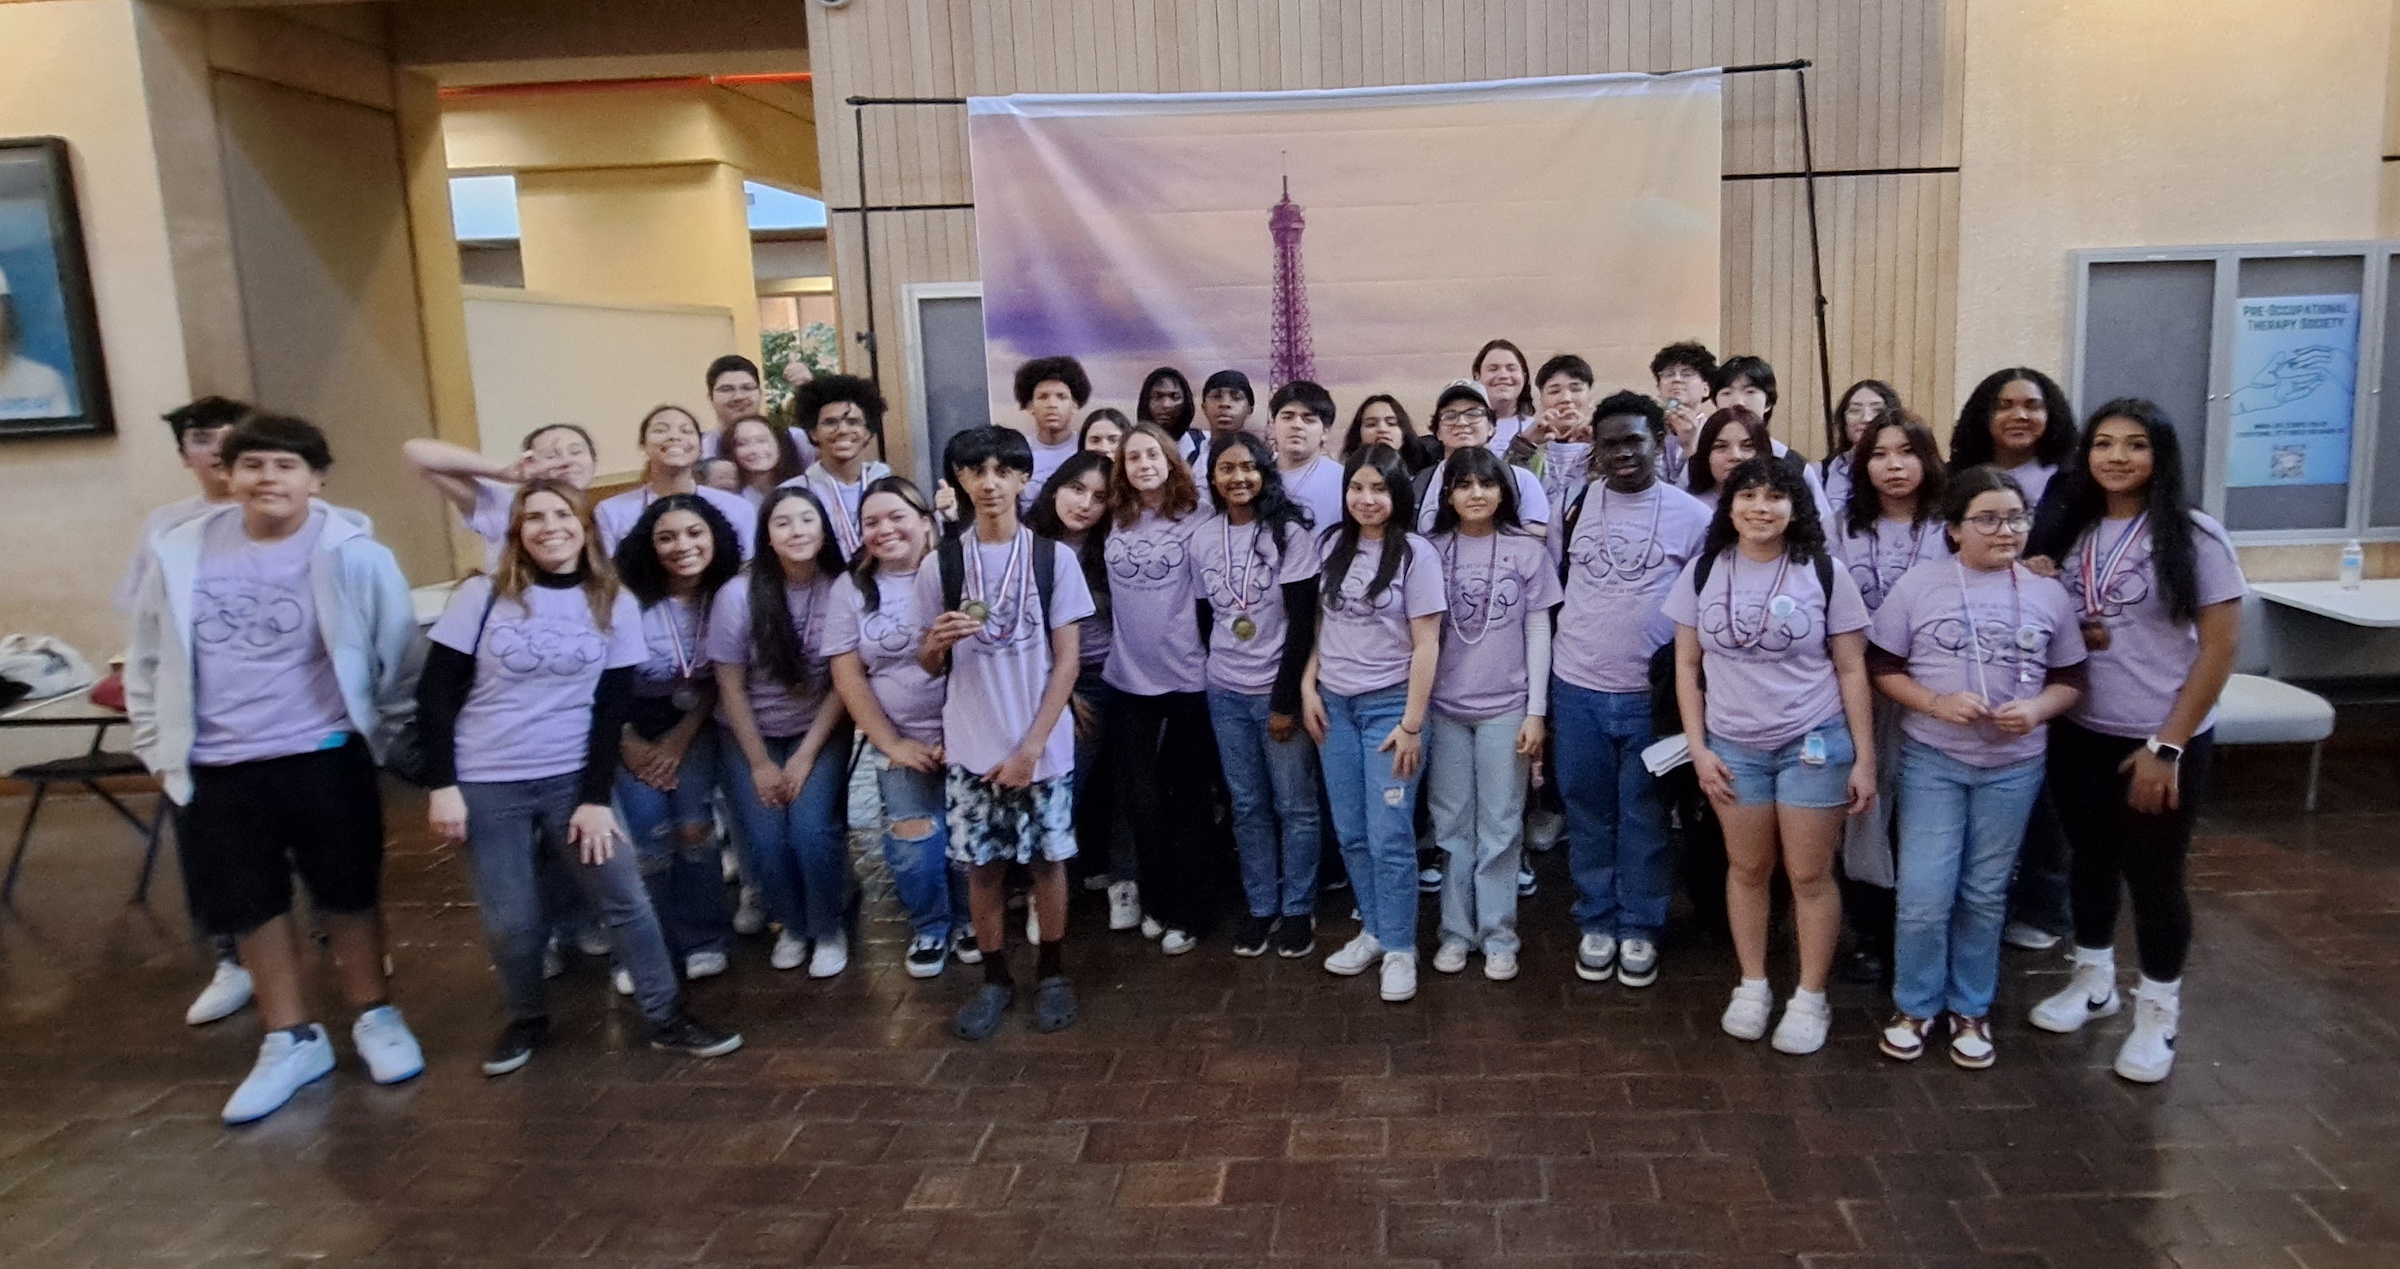 french students at the UTSA competition